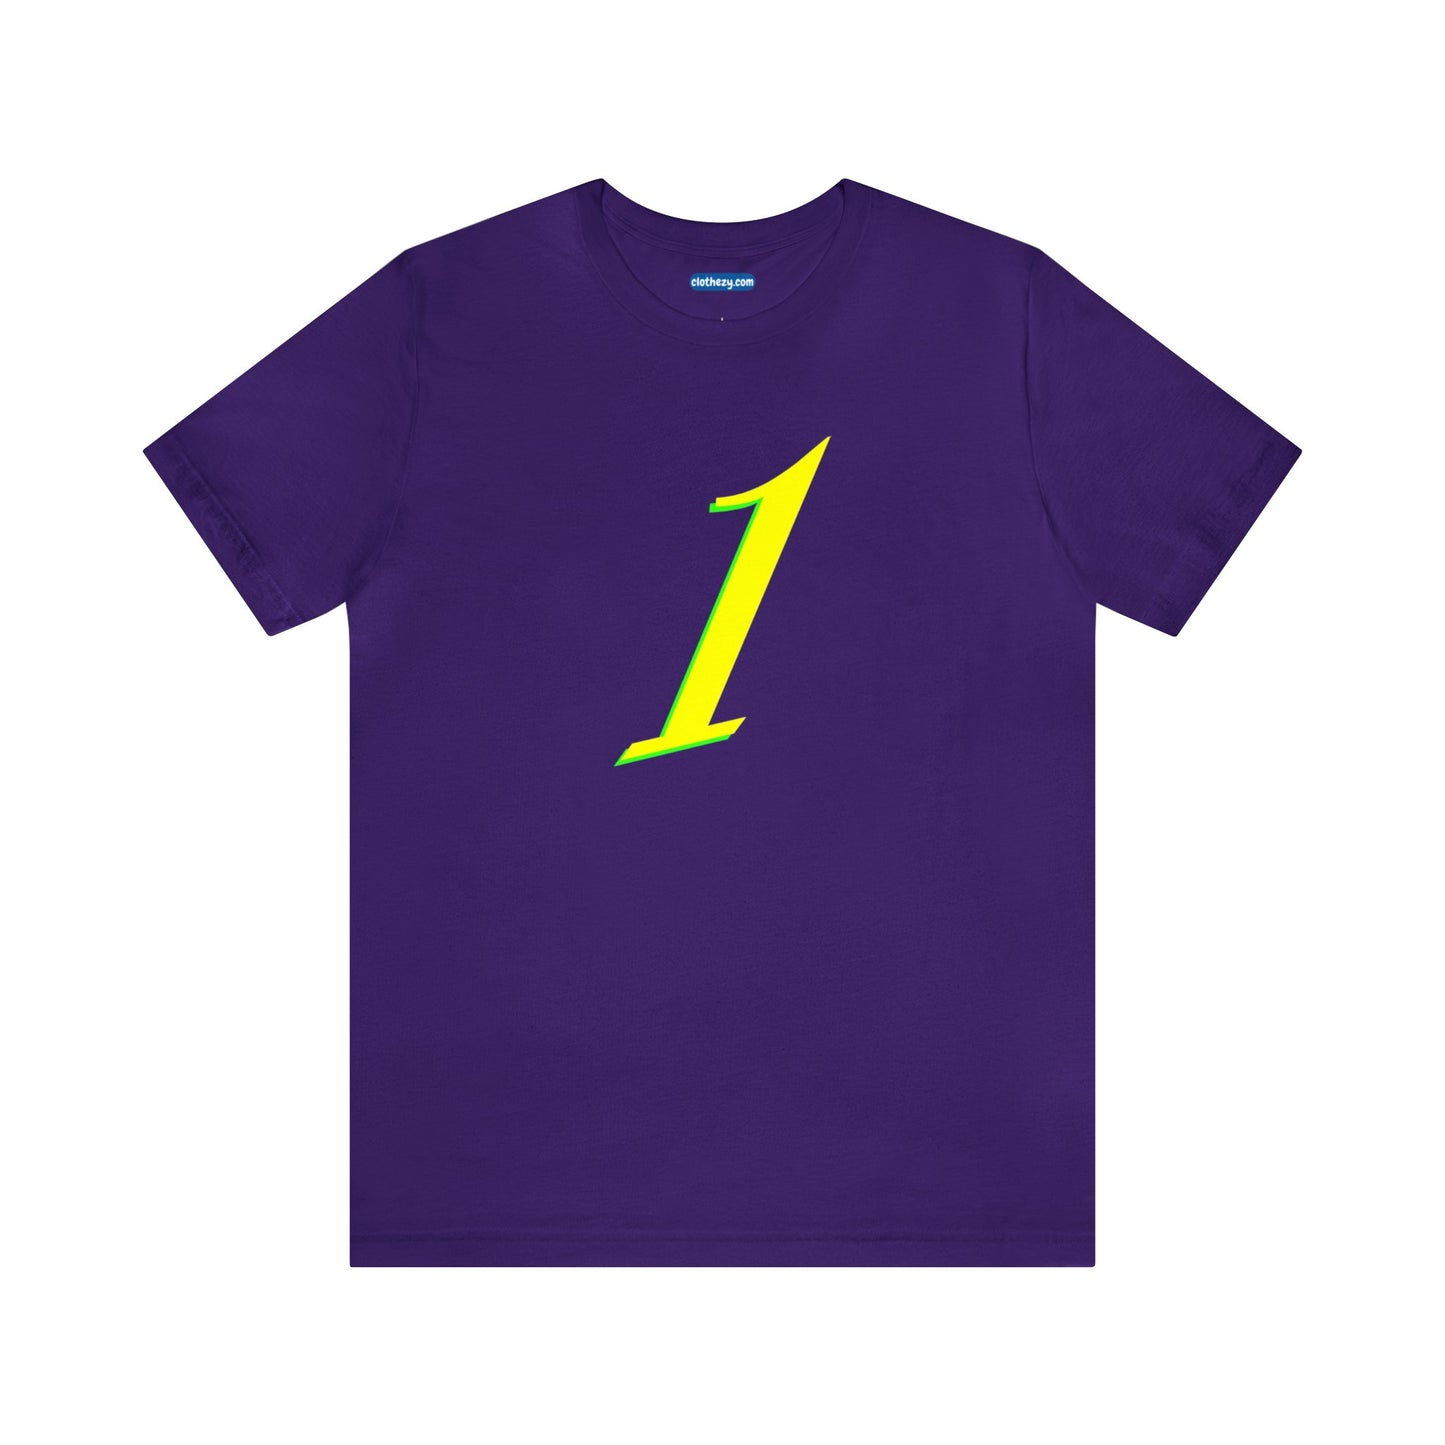 Number 1 Design - Soft Cotton Tee for birthdays and celebrations, Gift for friends and family, Multiple Options by clothezy.com in Royal Blue Size Small - Buy Now